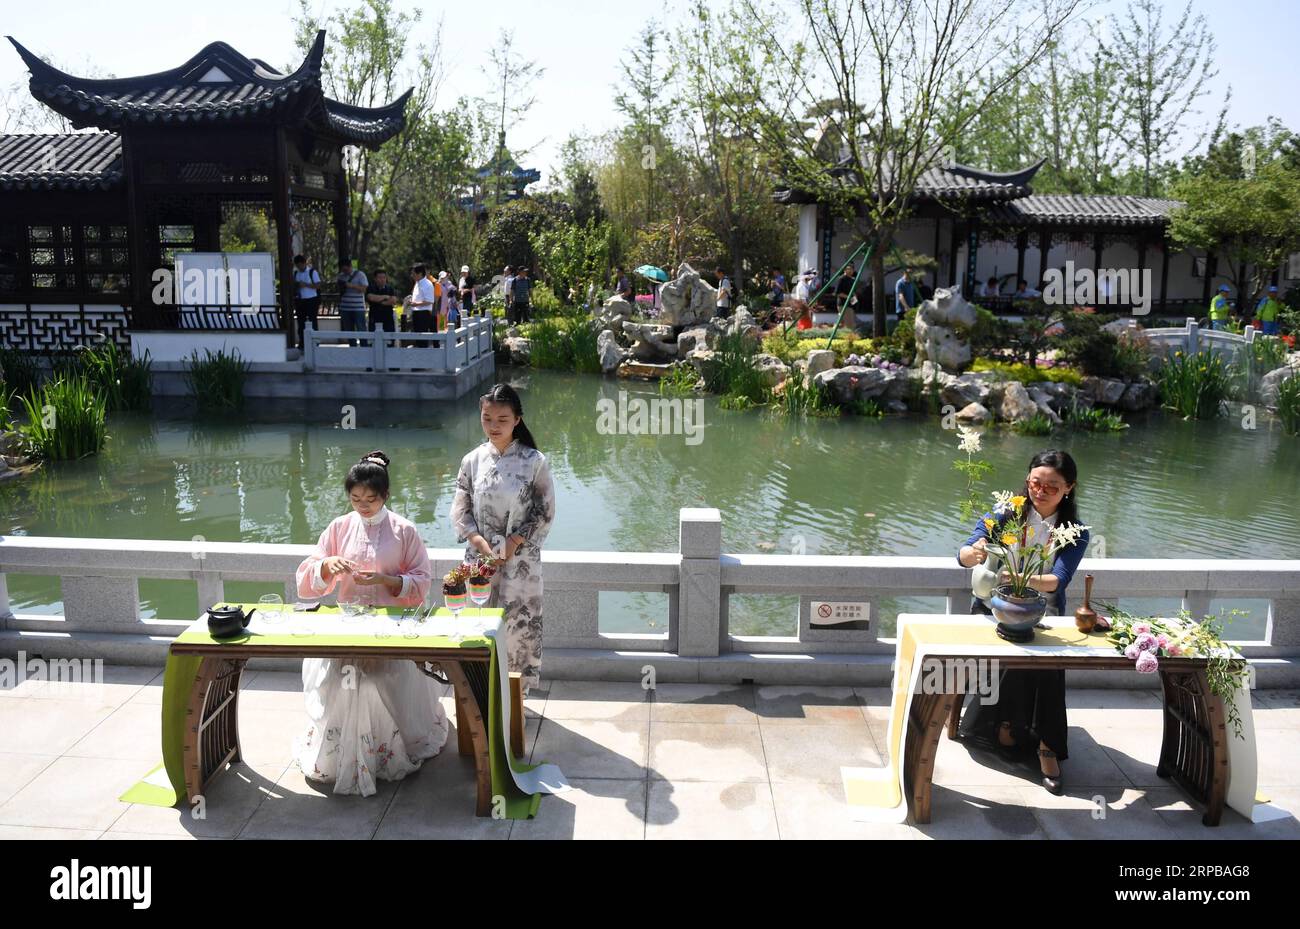 (190603) -- BEIJING, June 3, 2019 (Xinhua) -- Staff perform at Jiangsu Garden during Beijing International Horticultural Exhibition in Beijing, capital of China, June 2, 2019. Located in the east coast of mainland China, Jiangsu in recent years has made great efforts to adjust the ecological layout, optimize the industrial structure and adhere to green development. In 1997, the classical gardens of Suzhou were put on the UNESCO s heritage list. In 2018, the total number of gardens included in the Suzhou Garden List reached 108, and Suzhou was officially transformed from the City of Gardens int Stock Photo